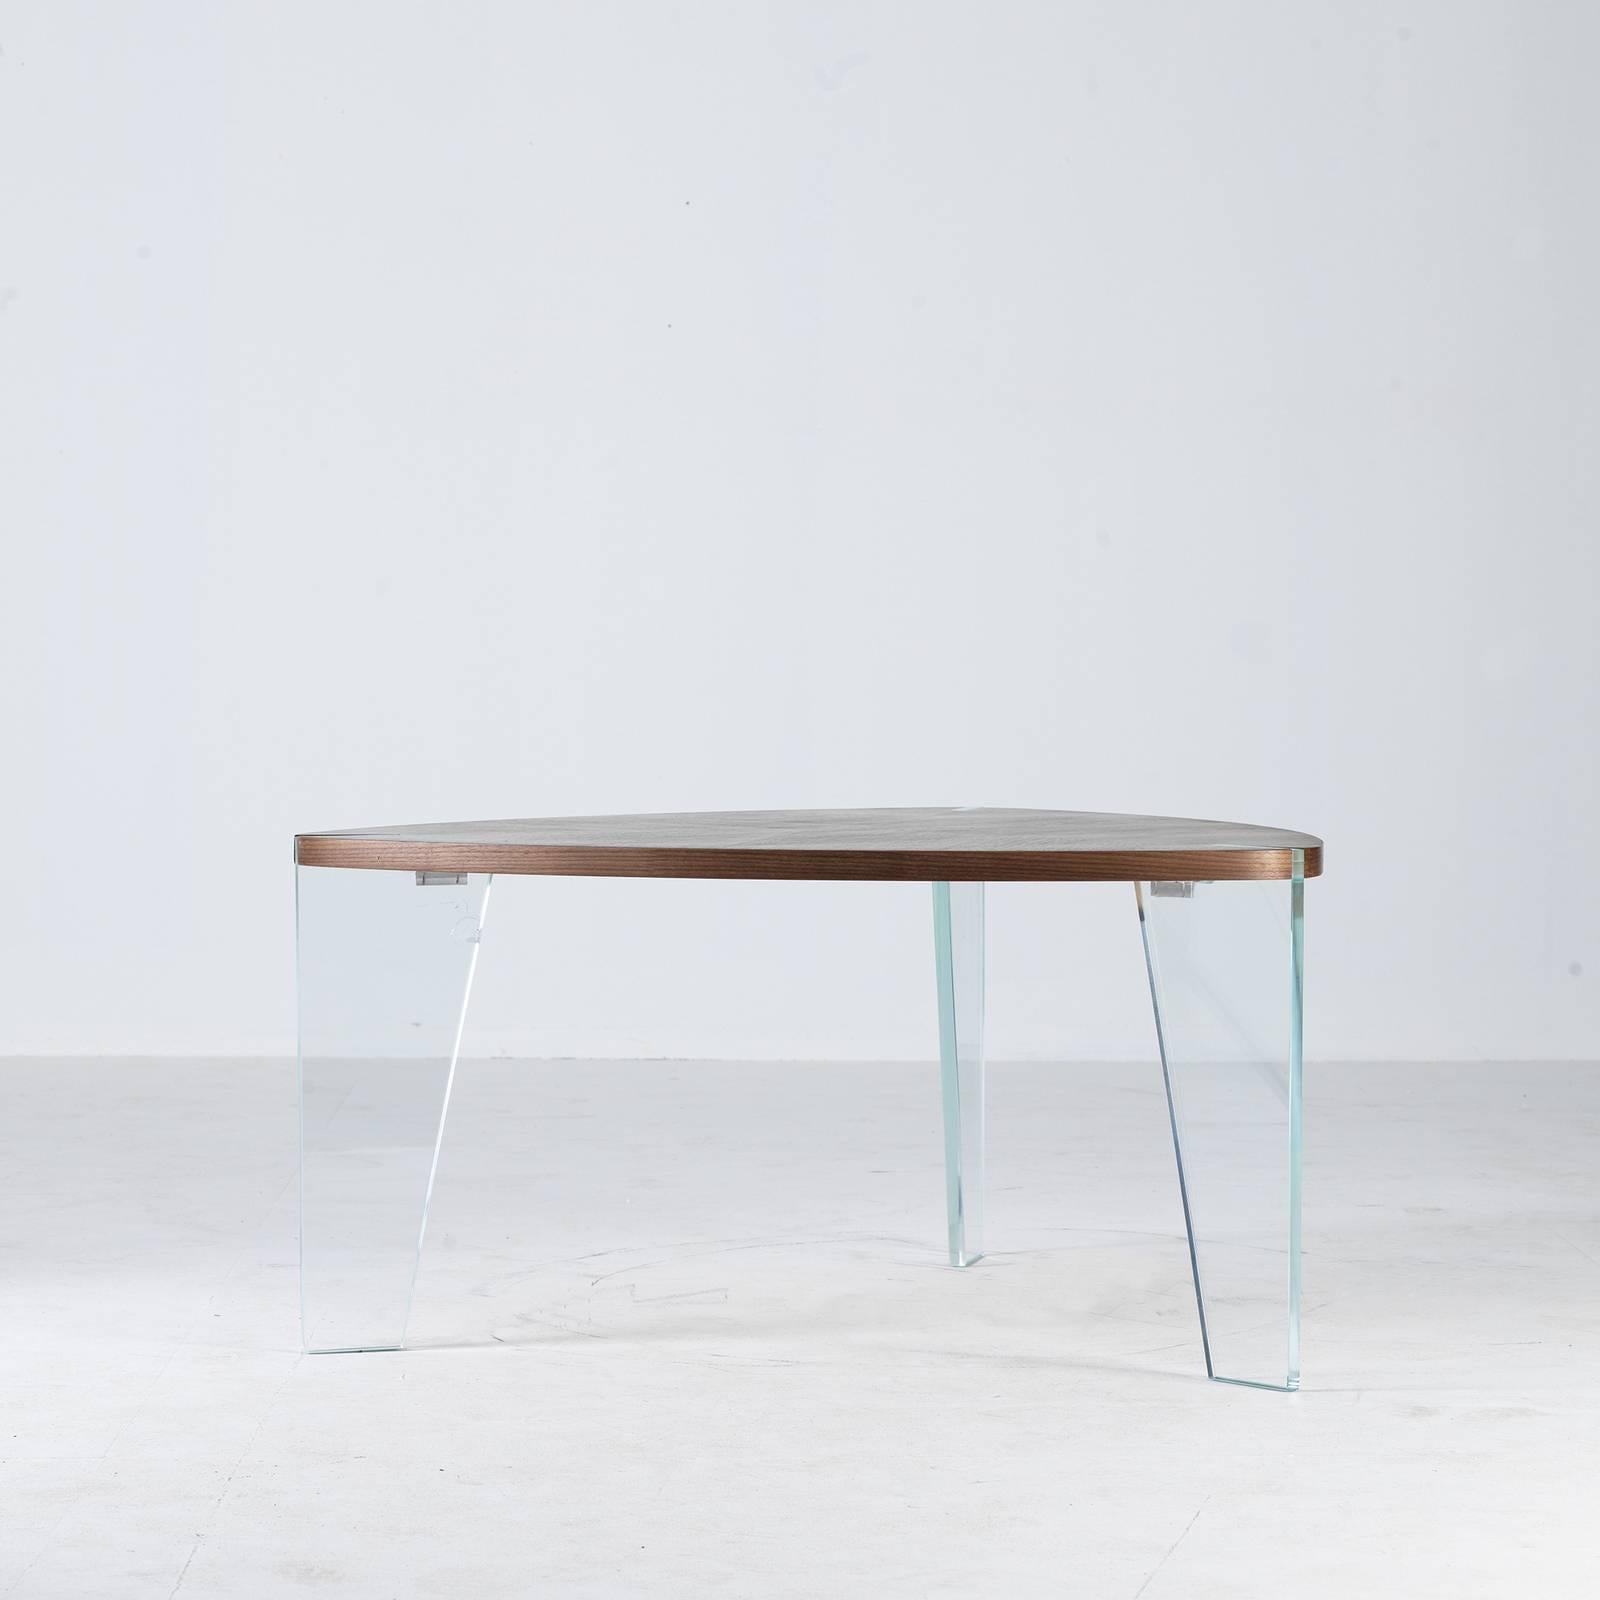 Subverting conventional design norms, this striking coffee table is composed of three curved extra-clear tempered glass legs framing a drop-shaped walnut top with an interlocking joint. The herringbone pattern of the wooden shelf creates an